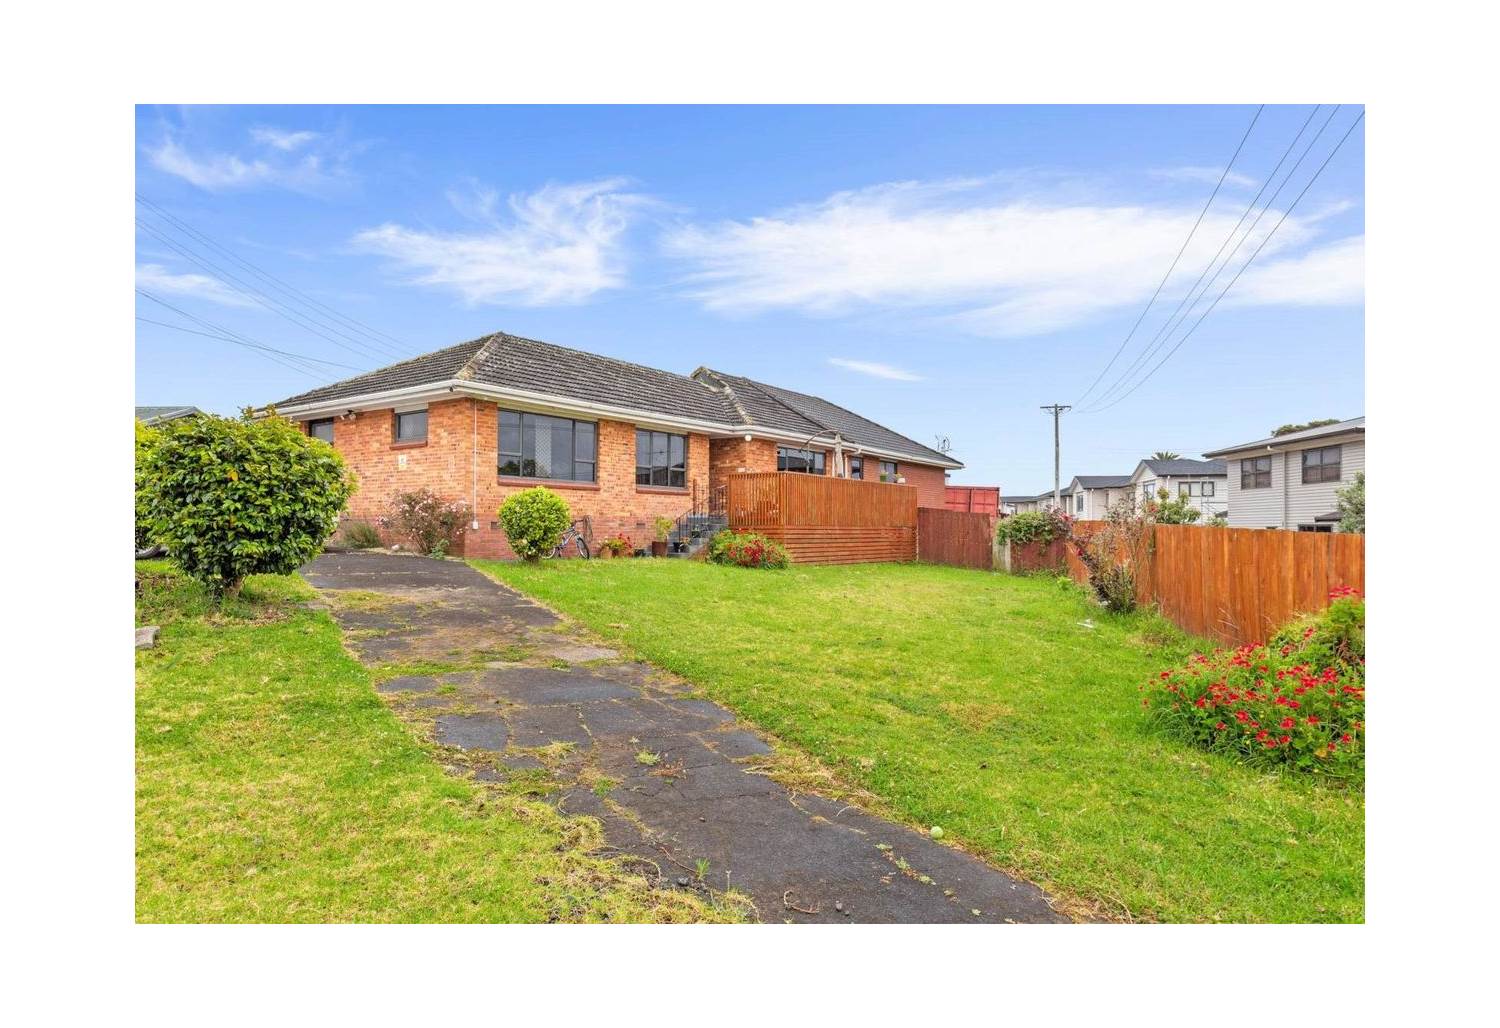 5 Bed, 3 Bath Home With Study! – ID 41PAPATOETOE Cover Image